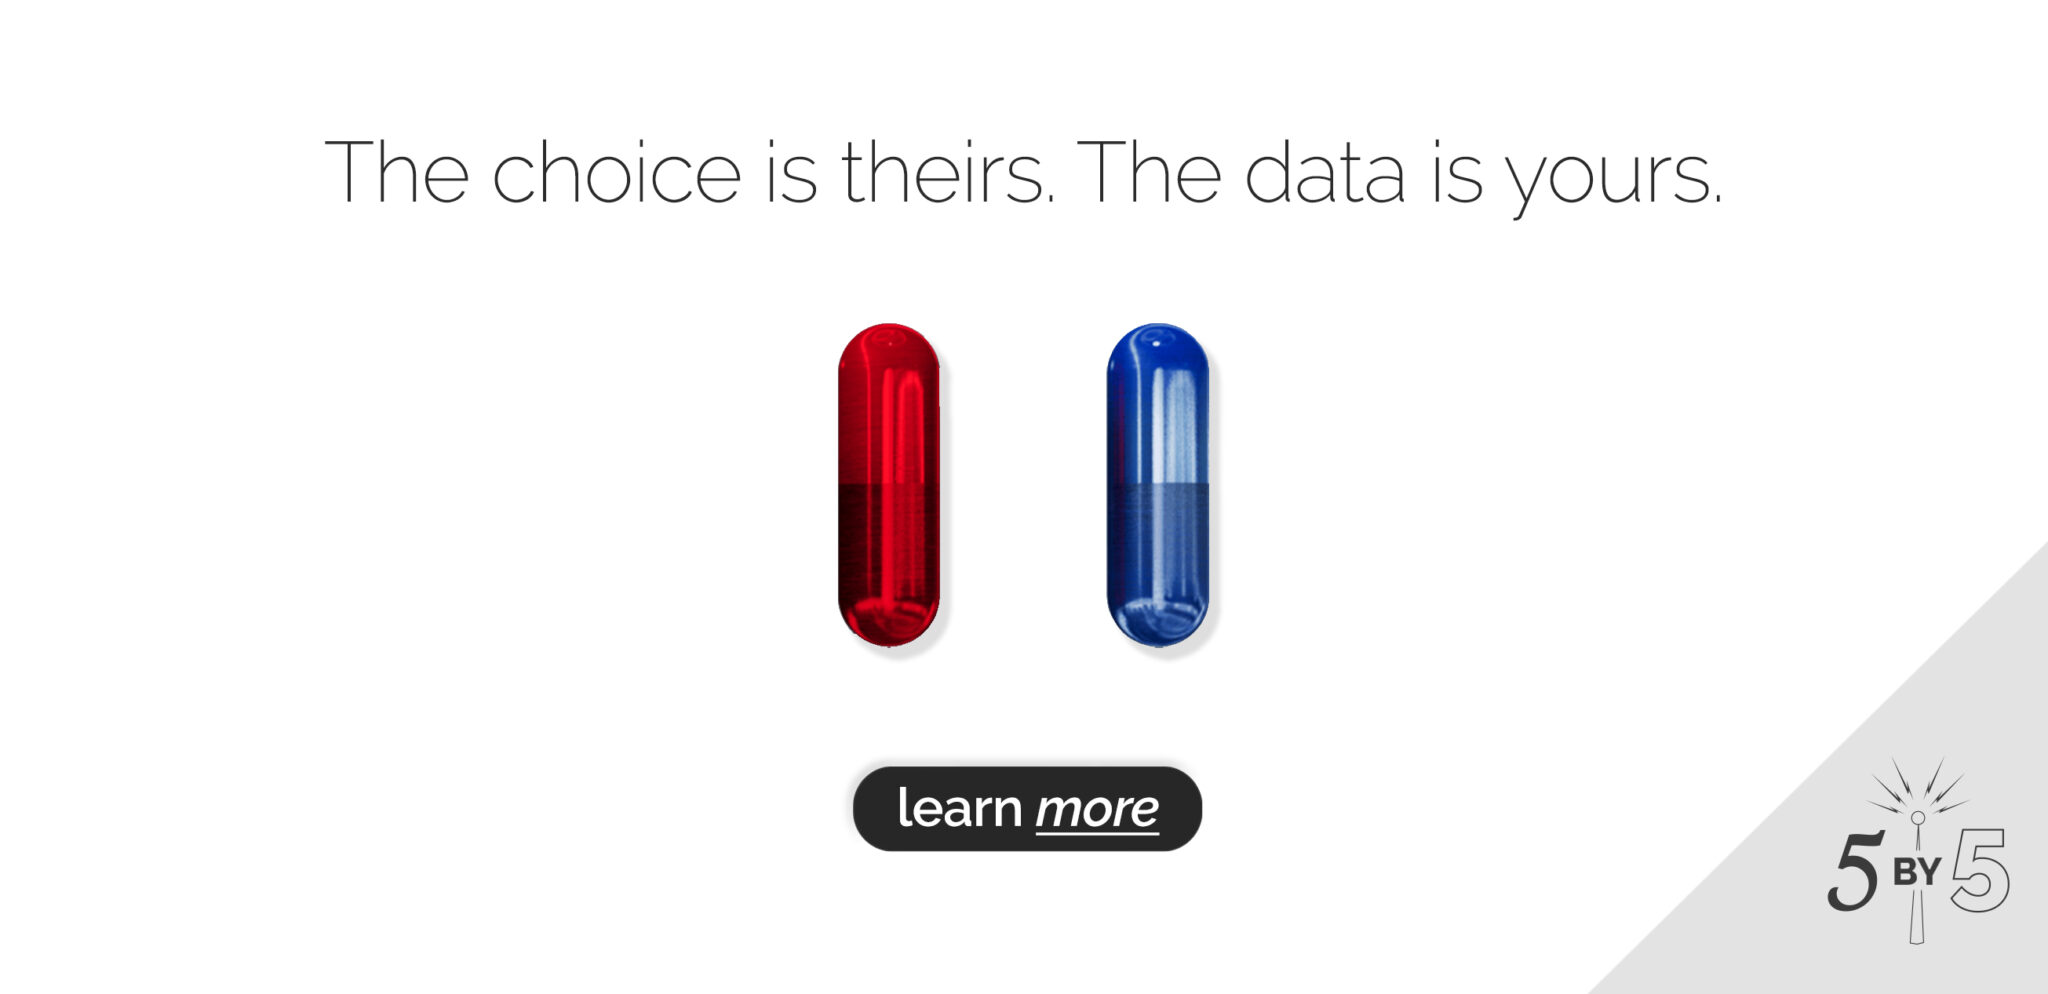 Red pill and blue pill a/b tests